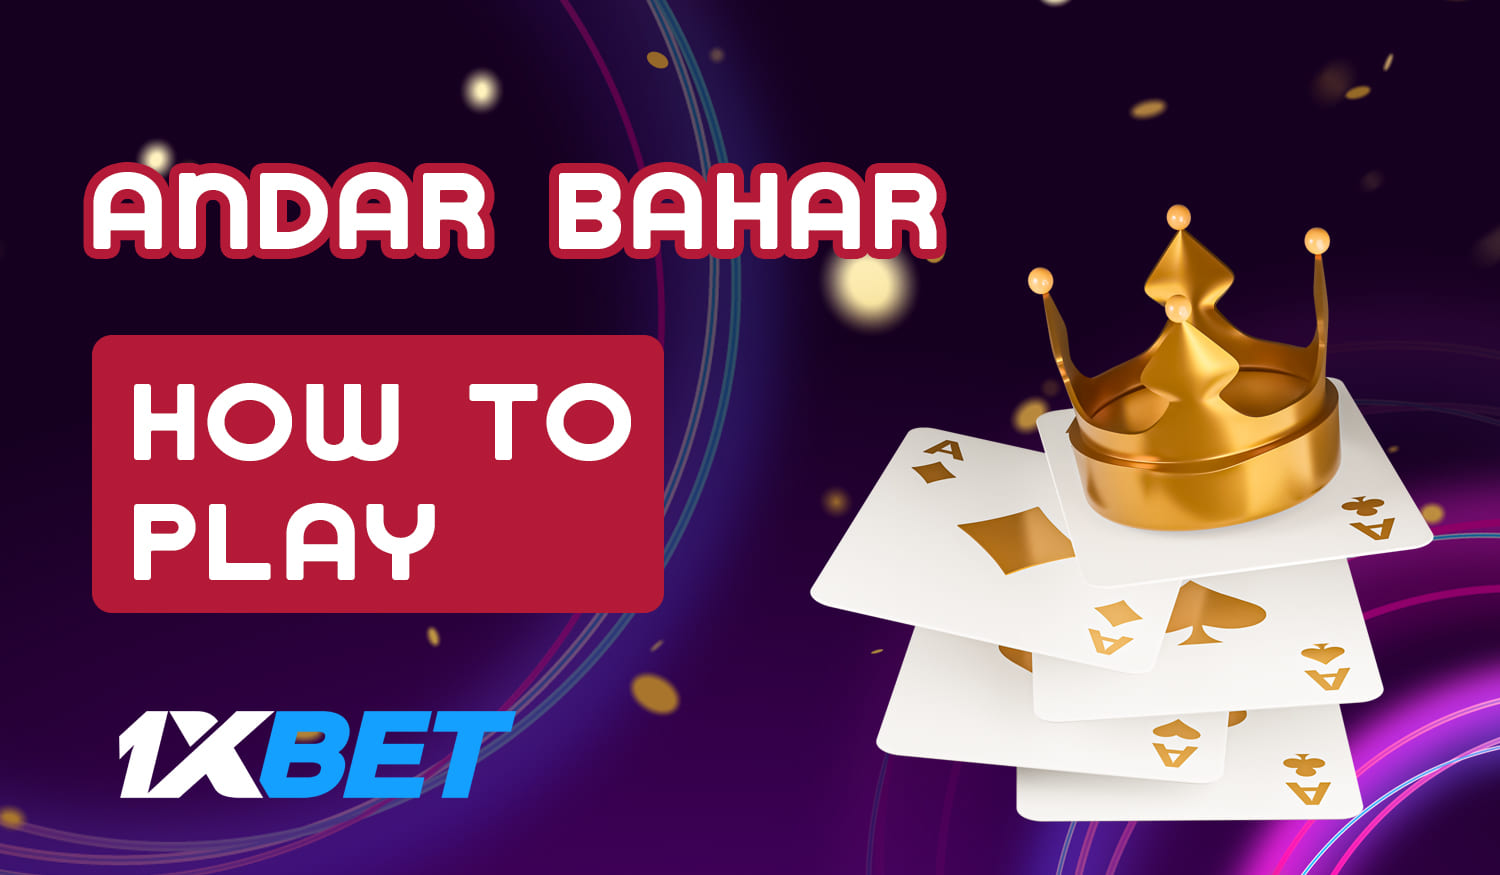 How fans of the game from India can start playing Andar Bahar on 1xBet